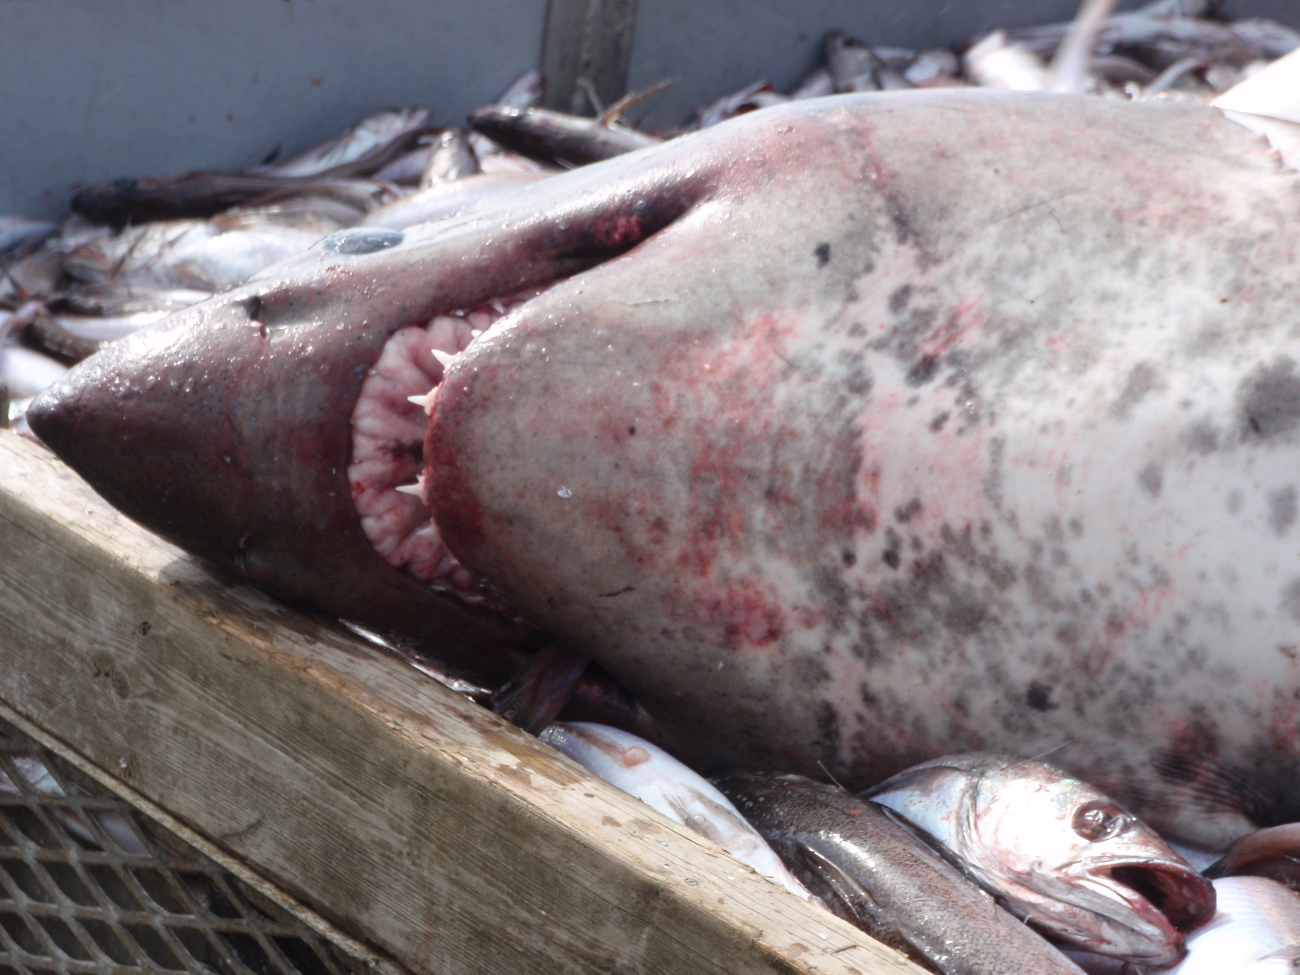 Formidable teeth of large shark caught during trawling operations